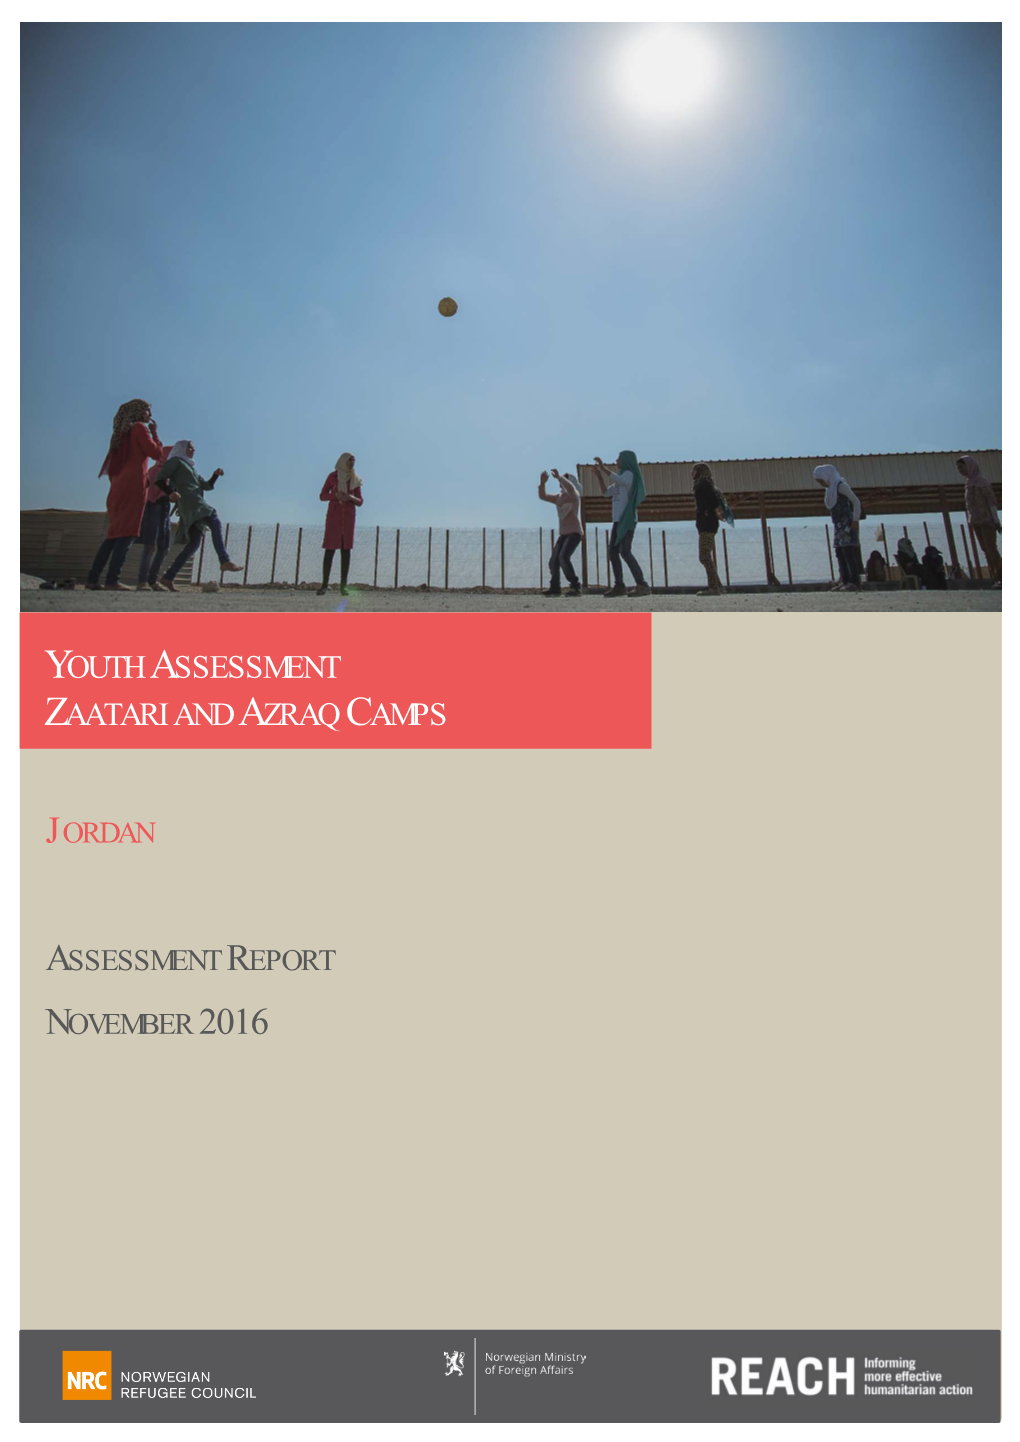 Youth Assessment Zaatari and Azraq Camps